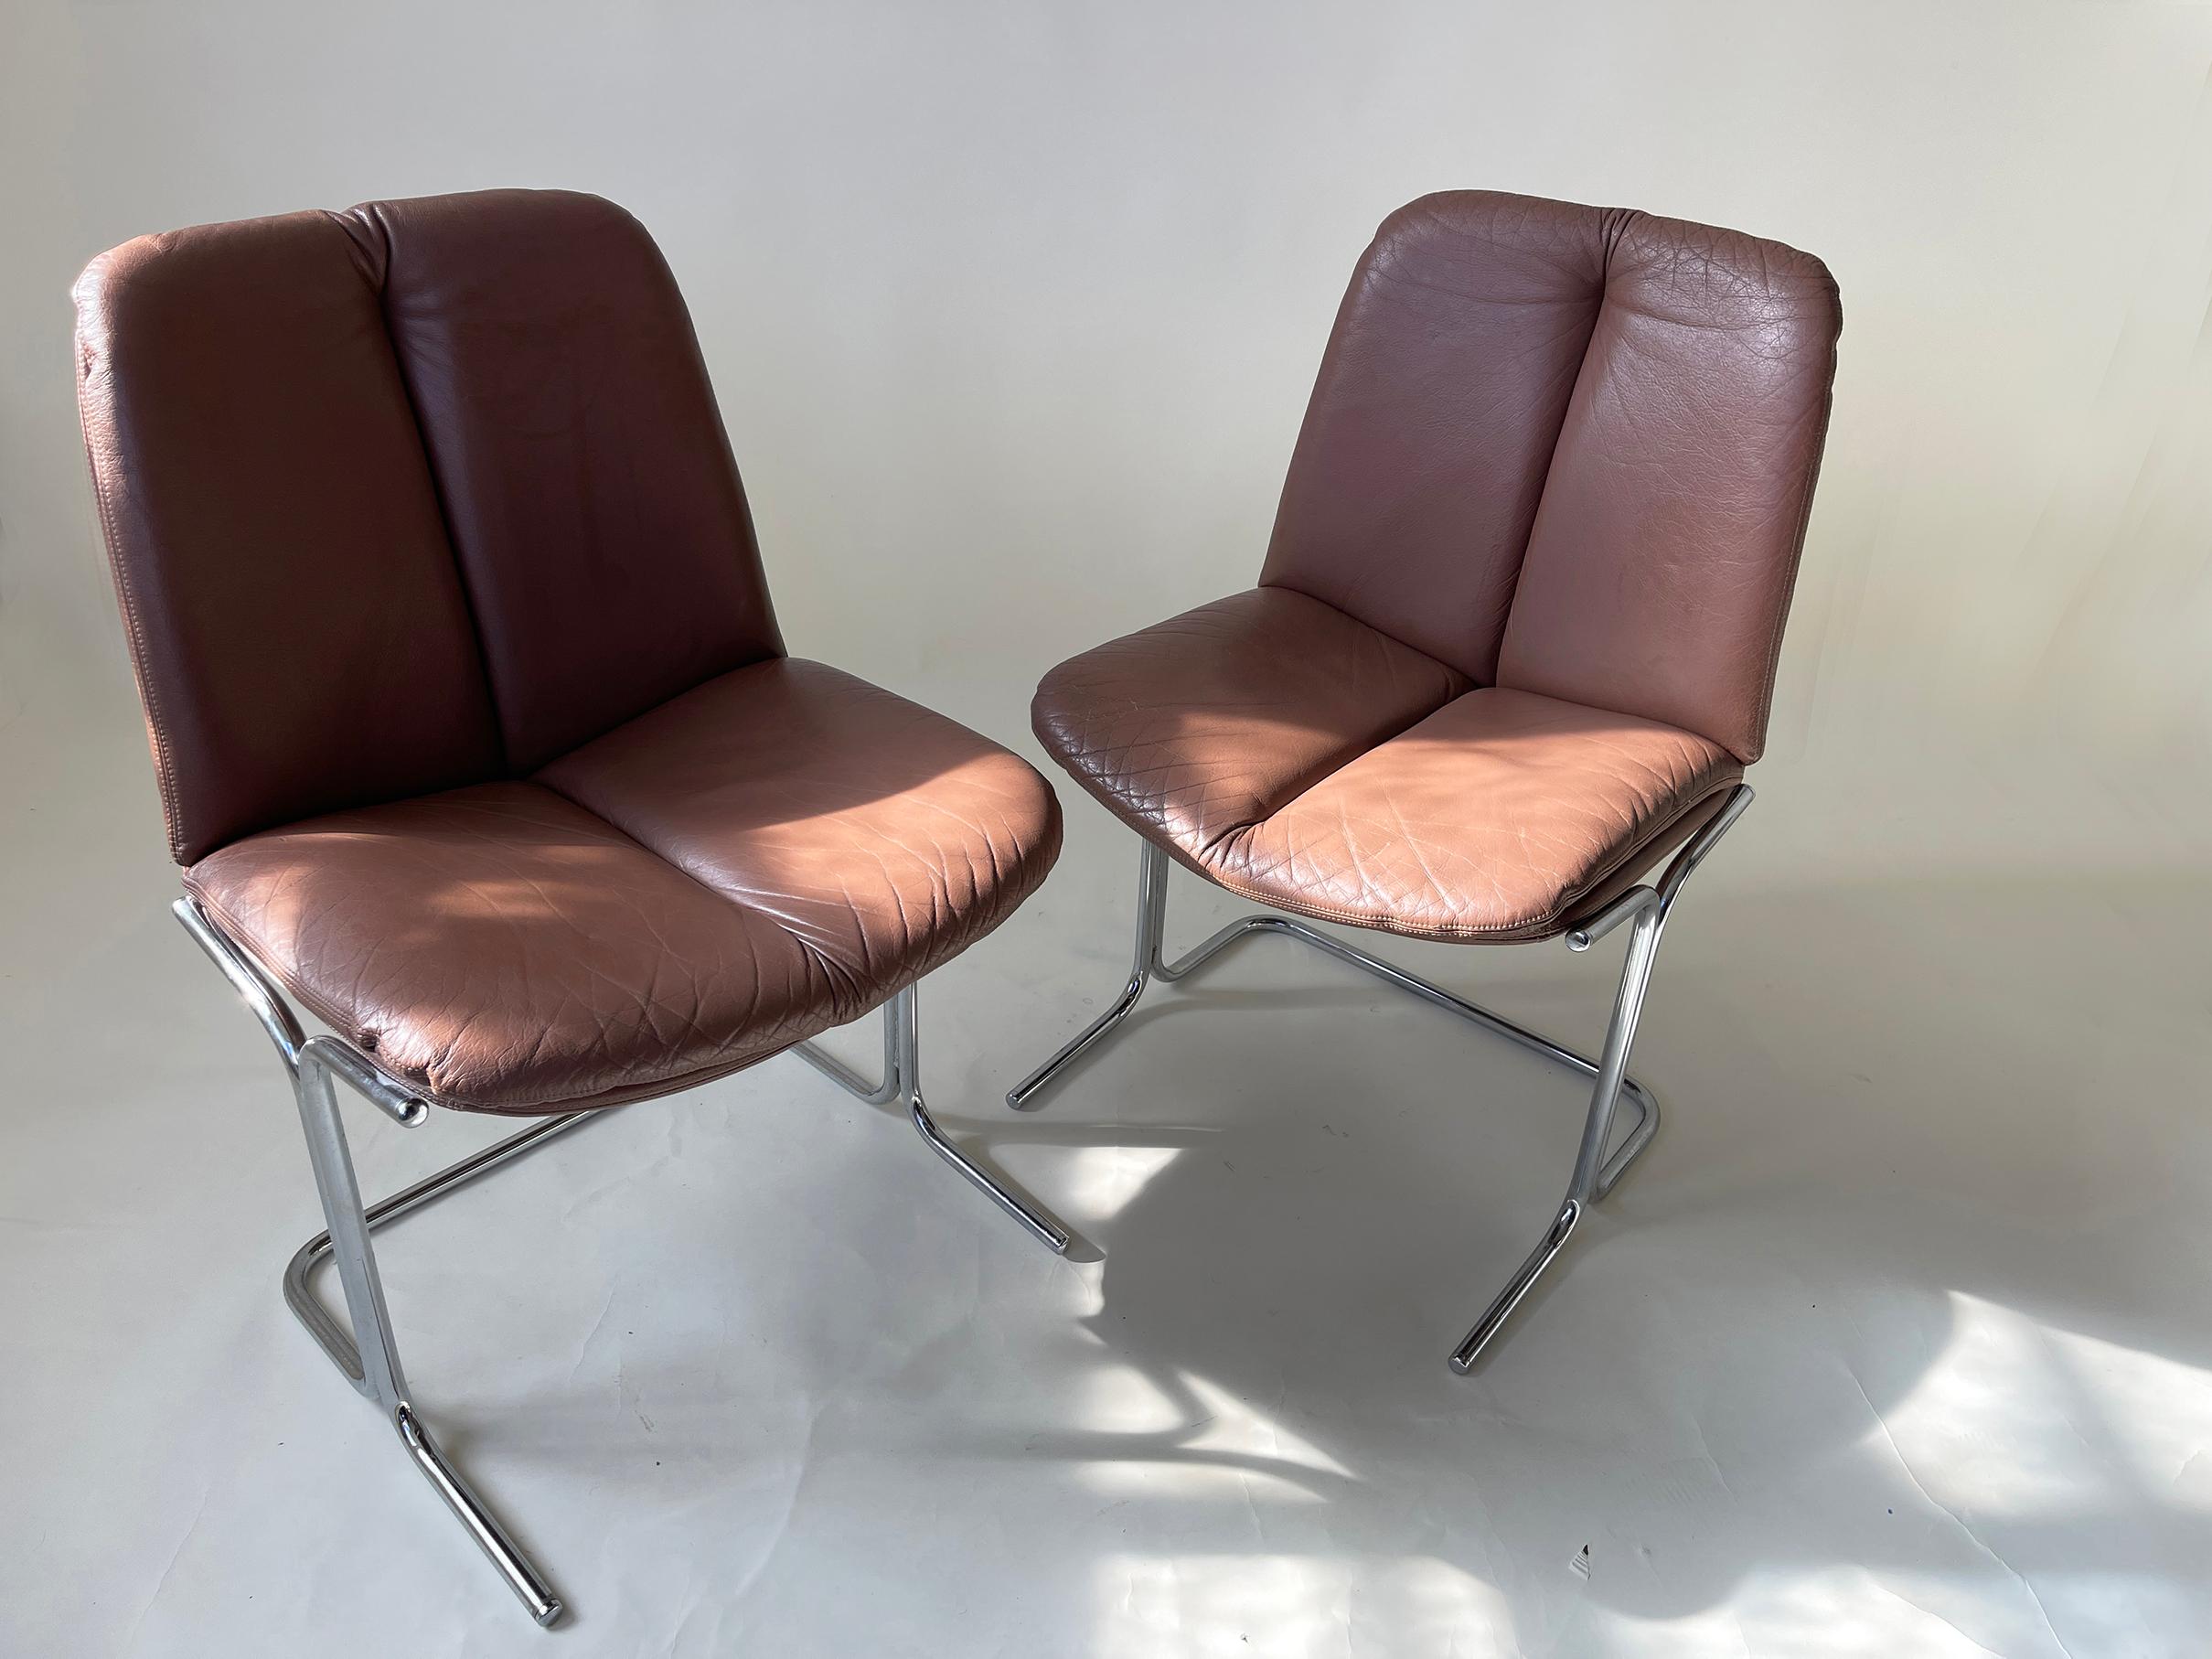 1960’s mid century Pieff Eleganza chairs by Tim Bates In Good Condition For Sale In London, GB